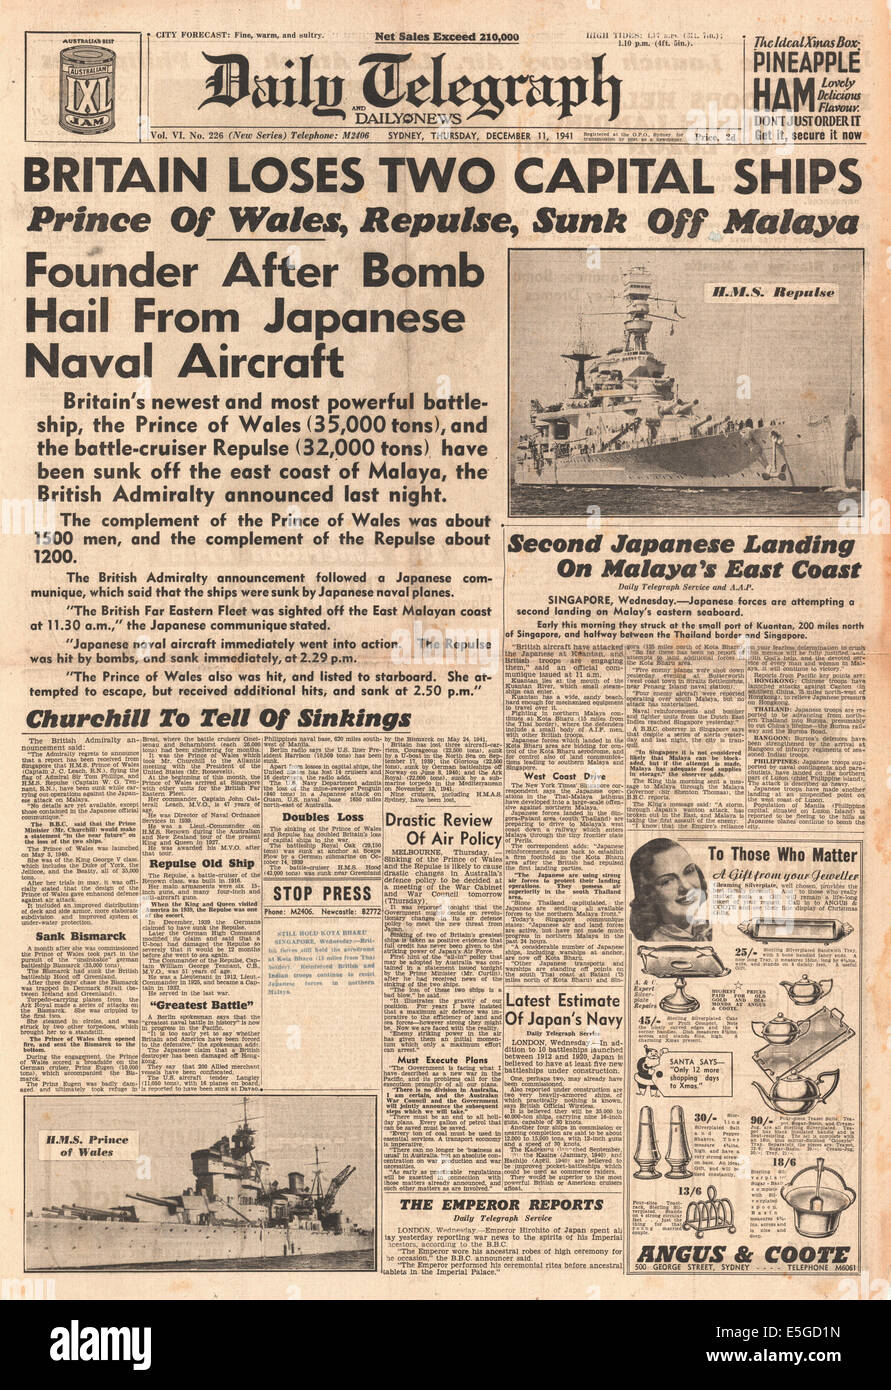 1941 Daily Telegraph (Sydney, Australia) front page reporting Japanese planes sink British battleships HMS Repulse and HMS Prince of Wales off Malaya Stock Photo